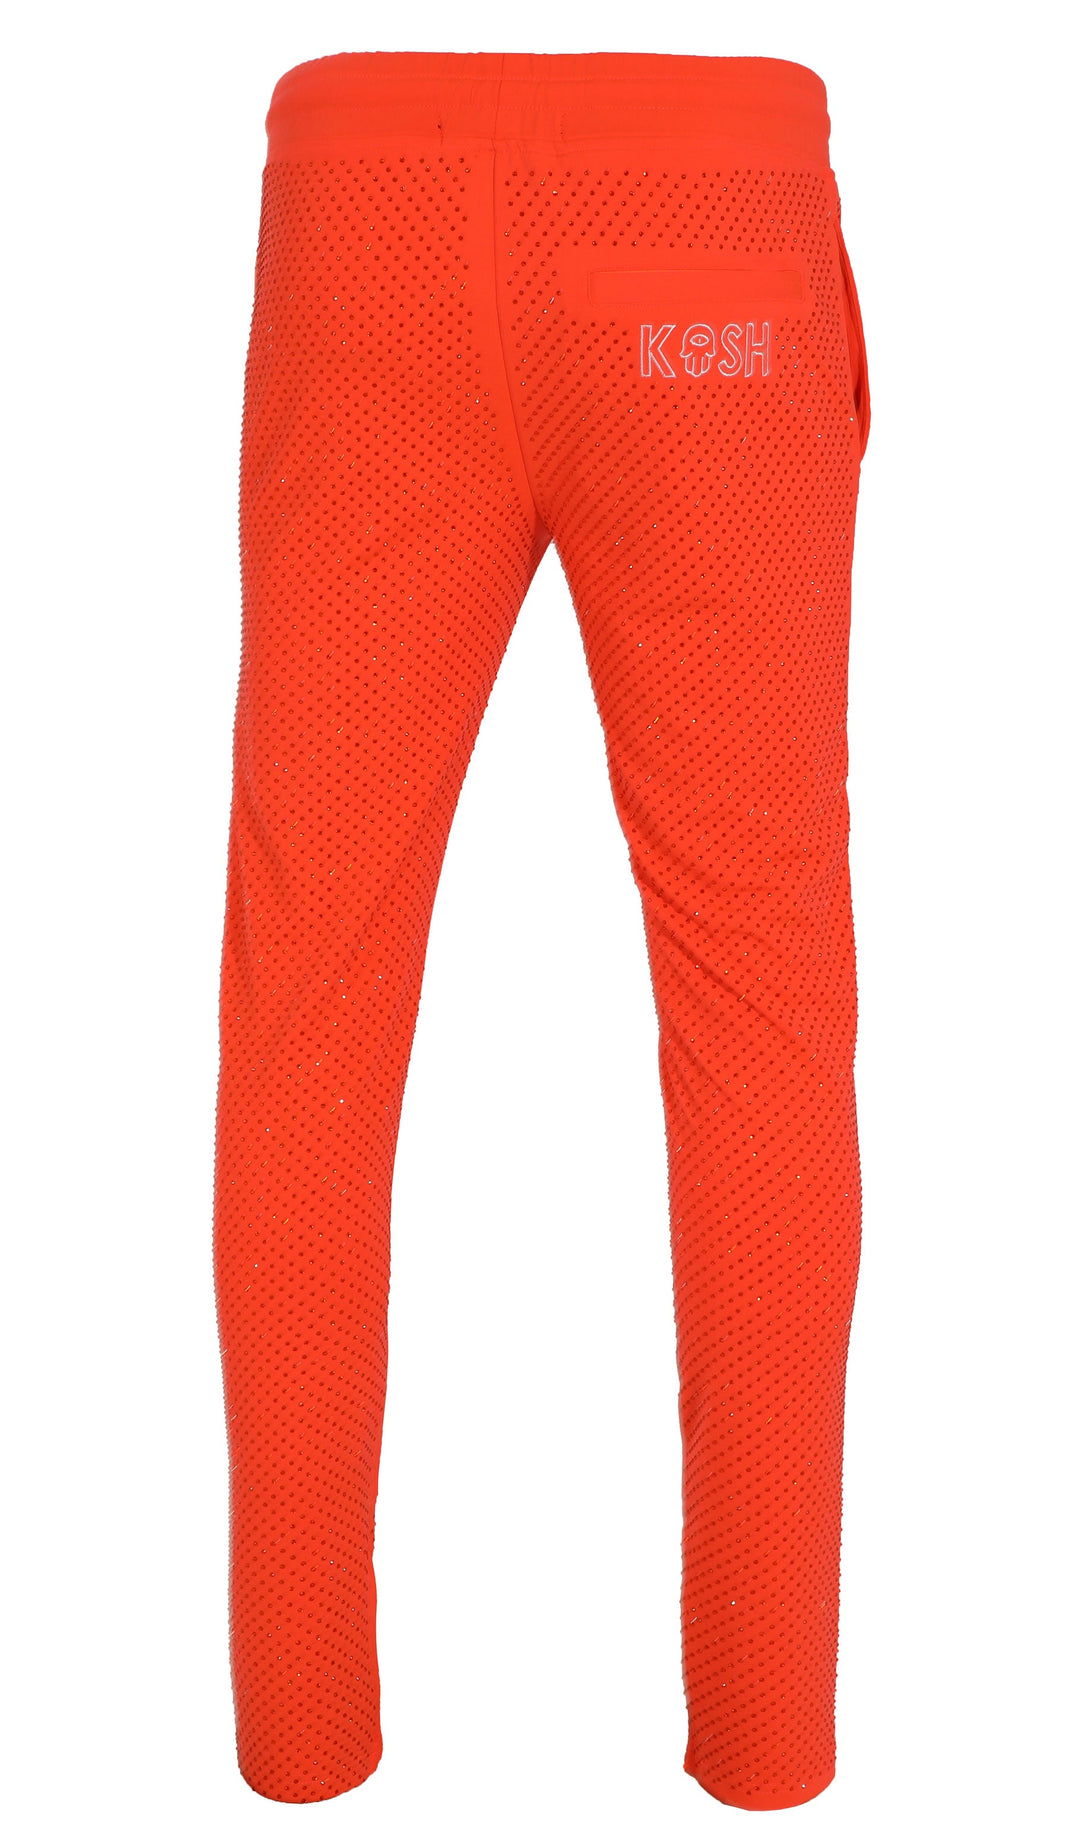 Kash all over diamond track pants Elastic Waistband Drawstring closure Color: Orange 100% Polyester Wrinkle Free Material Fits true to size